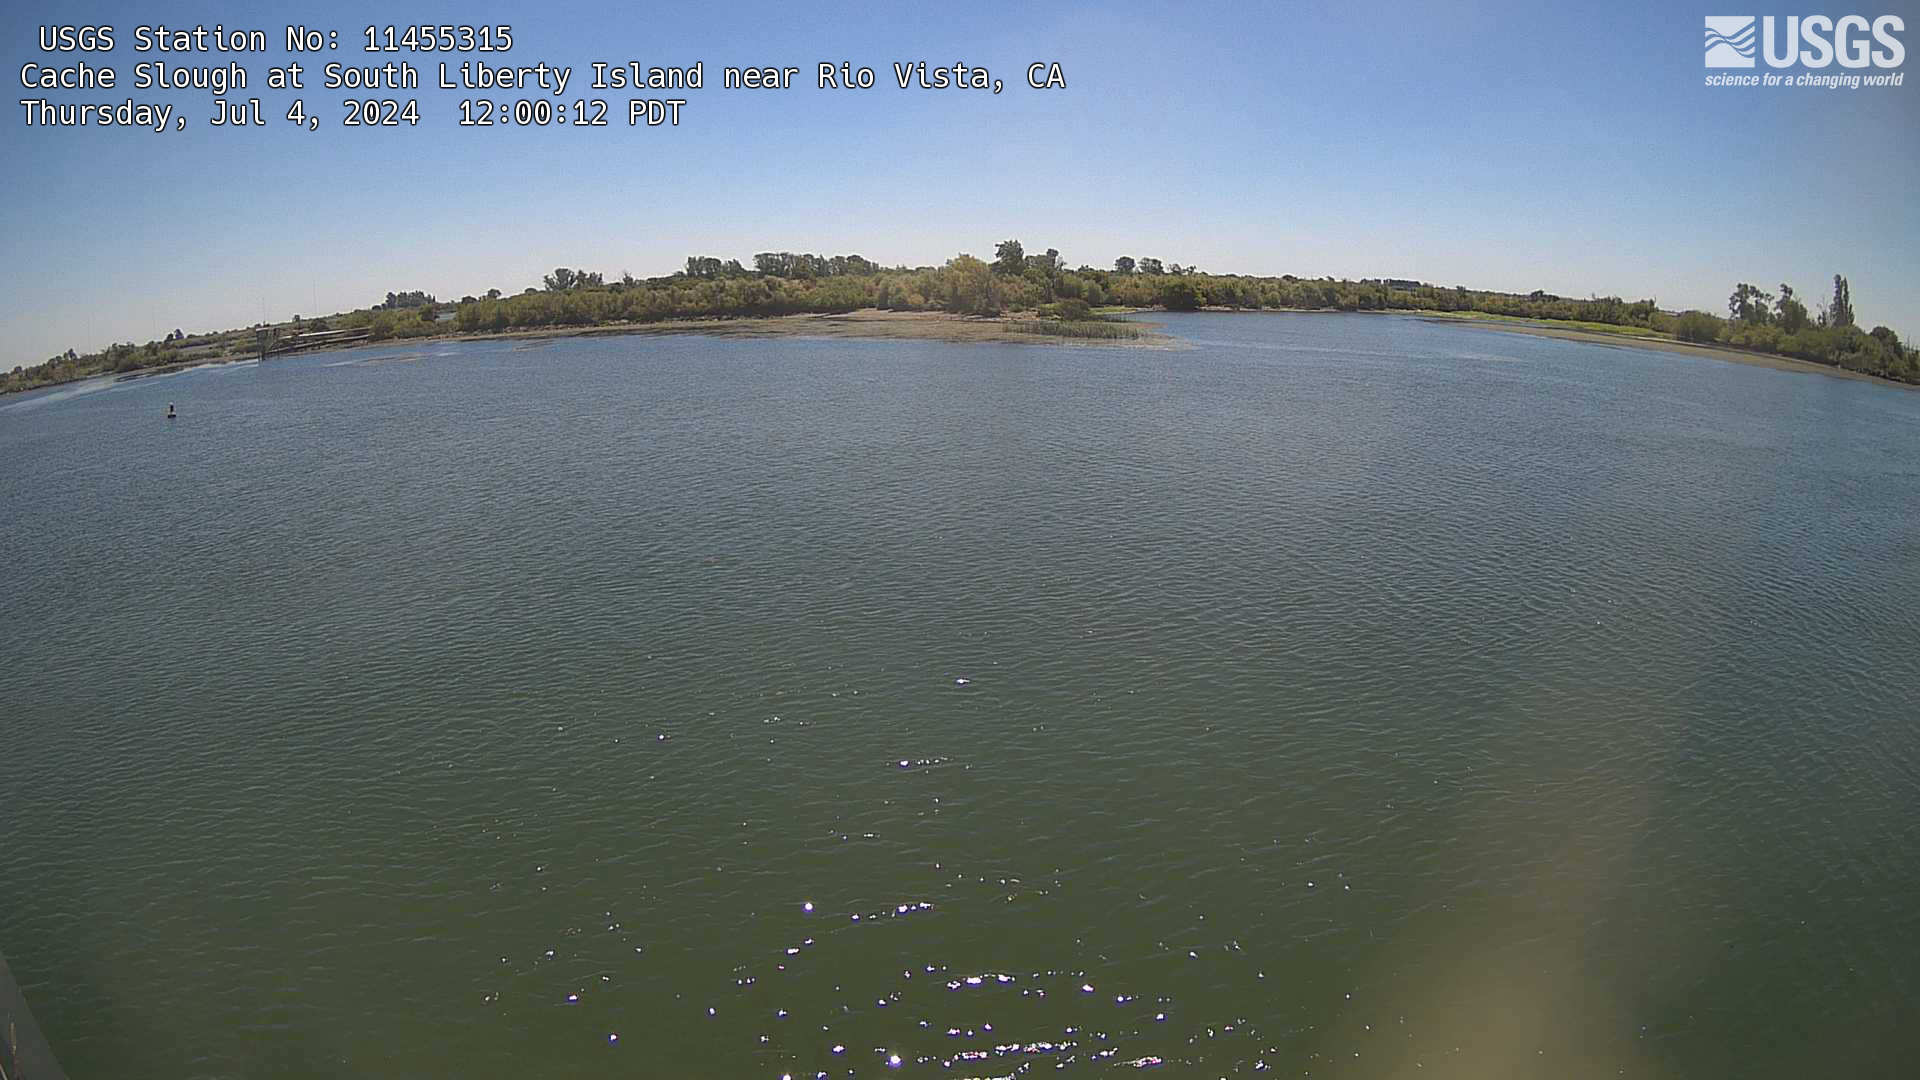 This is the most recent camera image from Cache Slough at South Liberty Island near Rio Vista Webcam